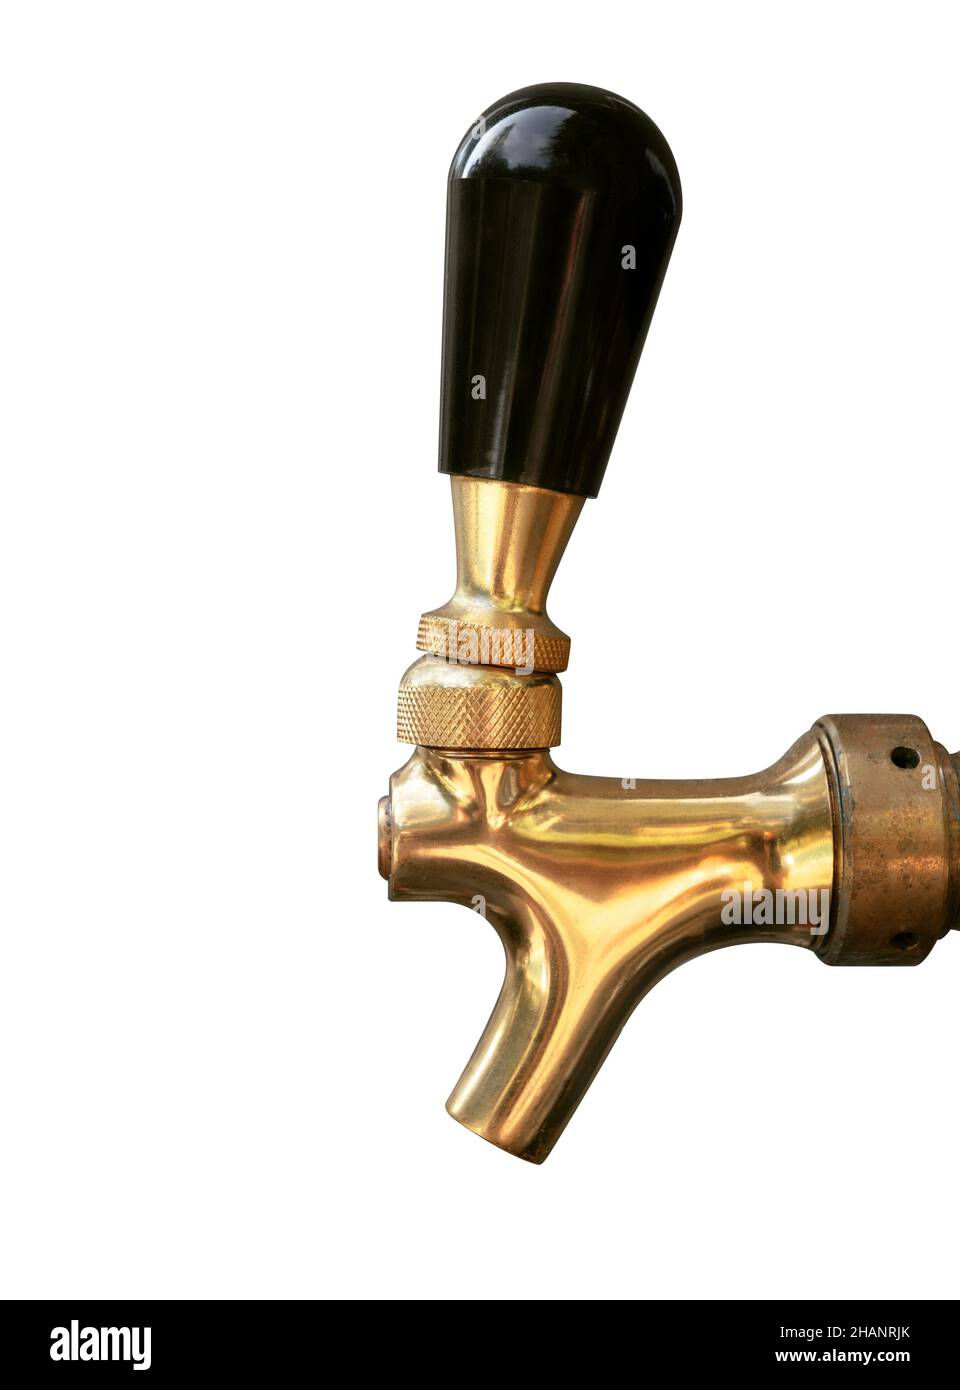 Brass beer tap or beer faucet, side view. Close up of standard or rear-closing faucet. Yellow gold forged faucet body and black tap knob Stock Photo